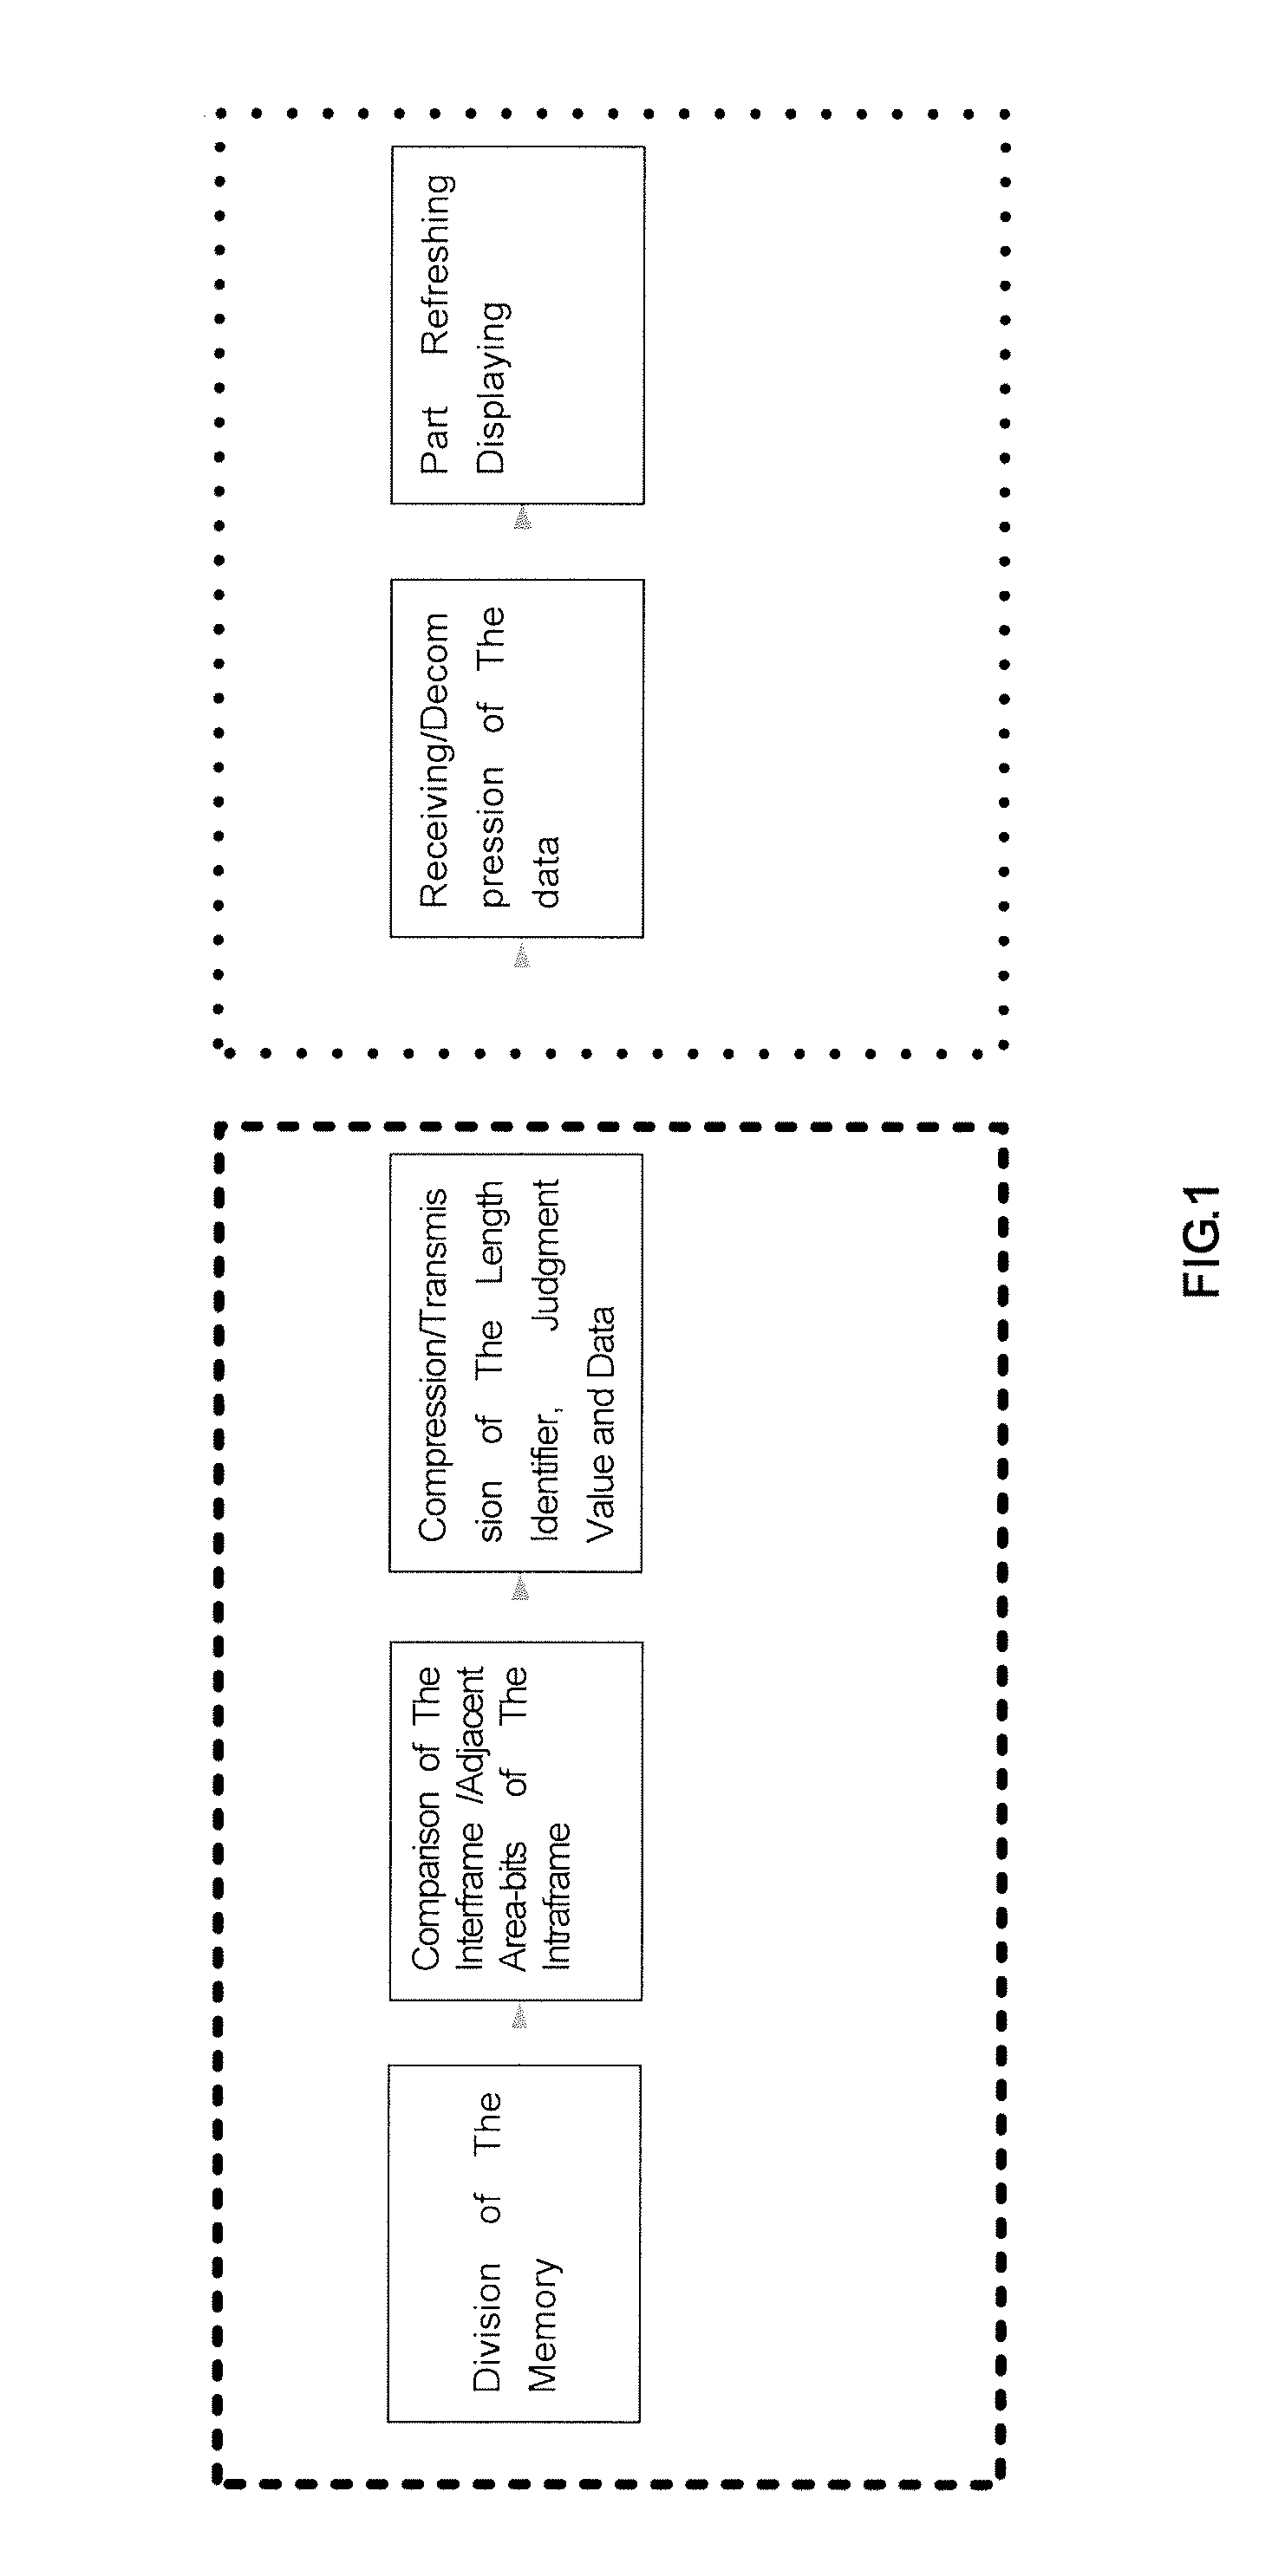 Method of remote displaying and processing based on server/client architecture